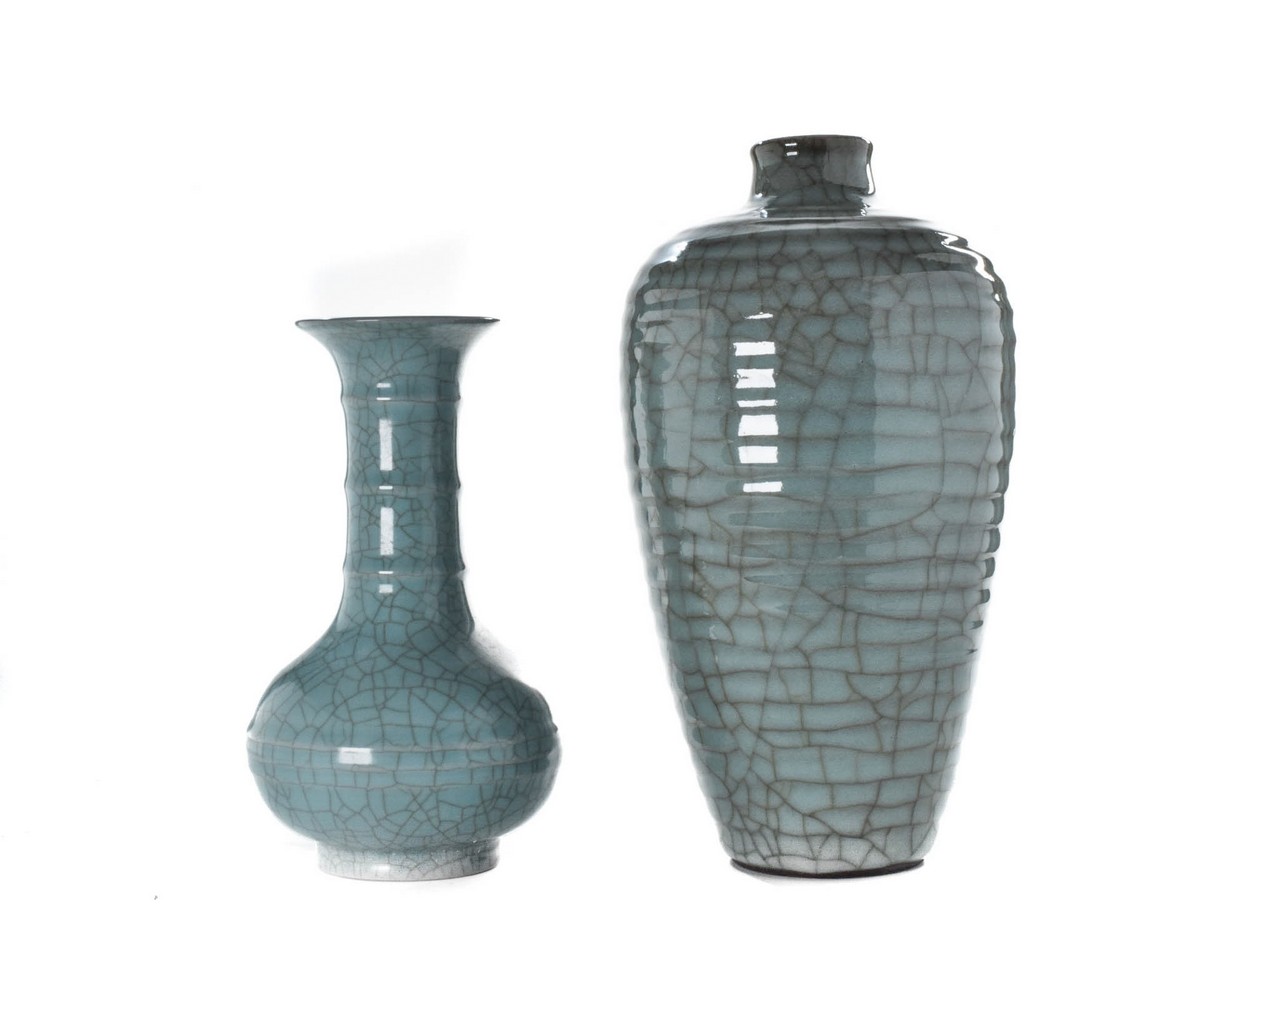 PAIR OF CHINESE CRACKLED GLAZE PORCELAIN VESSELS - Image 2 of 8